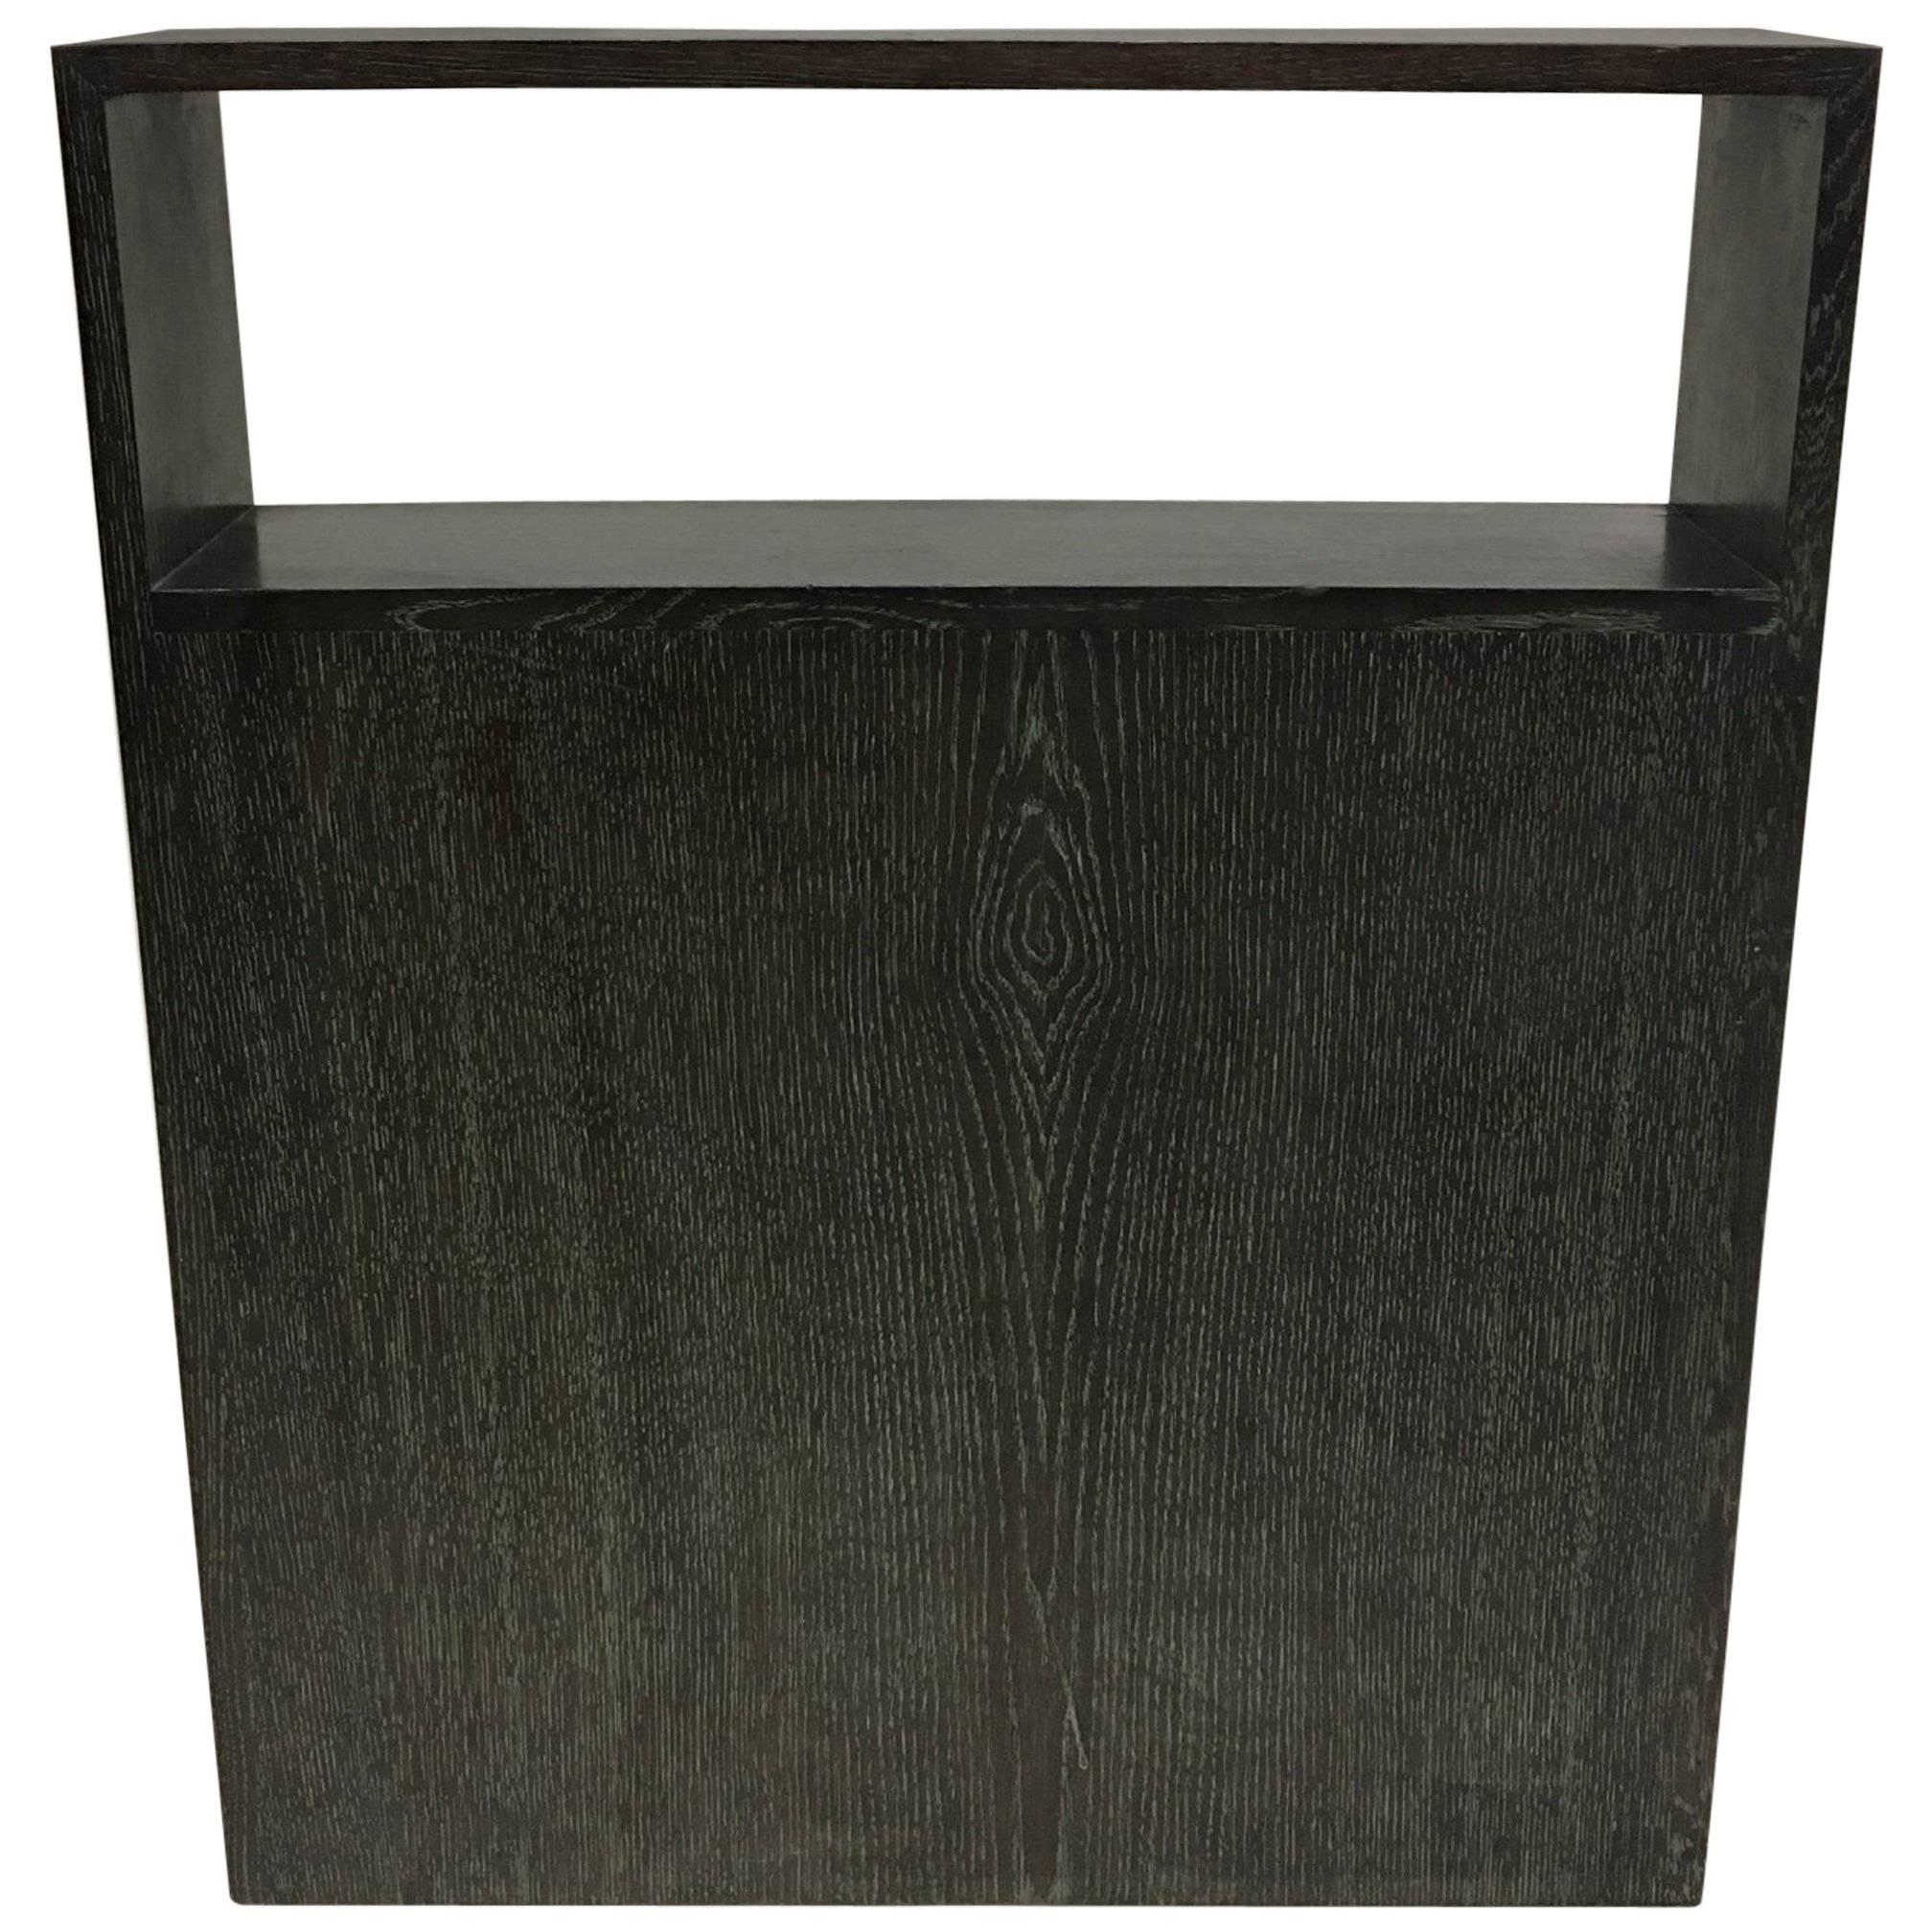 A sleek, narrow profile double level console by Andre Sornay, France, circa 1930 in faint green cerused oak. A sober, Modern statement. 

The piece is ideal for small spaces such as an entrance way, vestibule or hallway. 

Literature: see